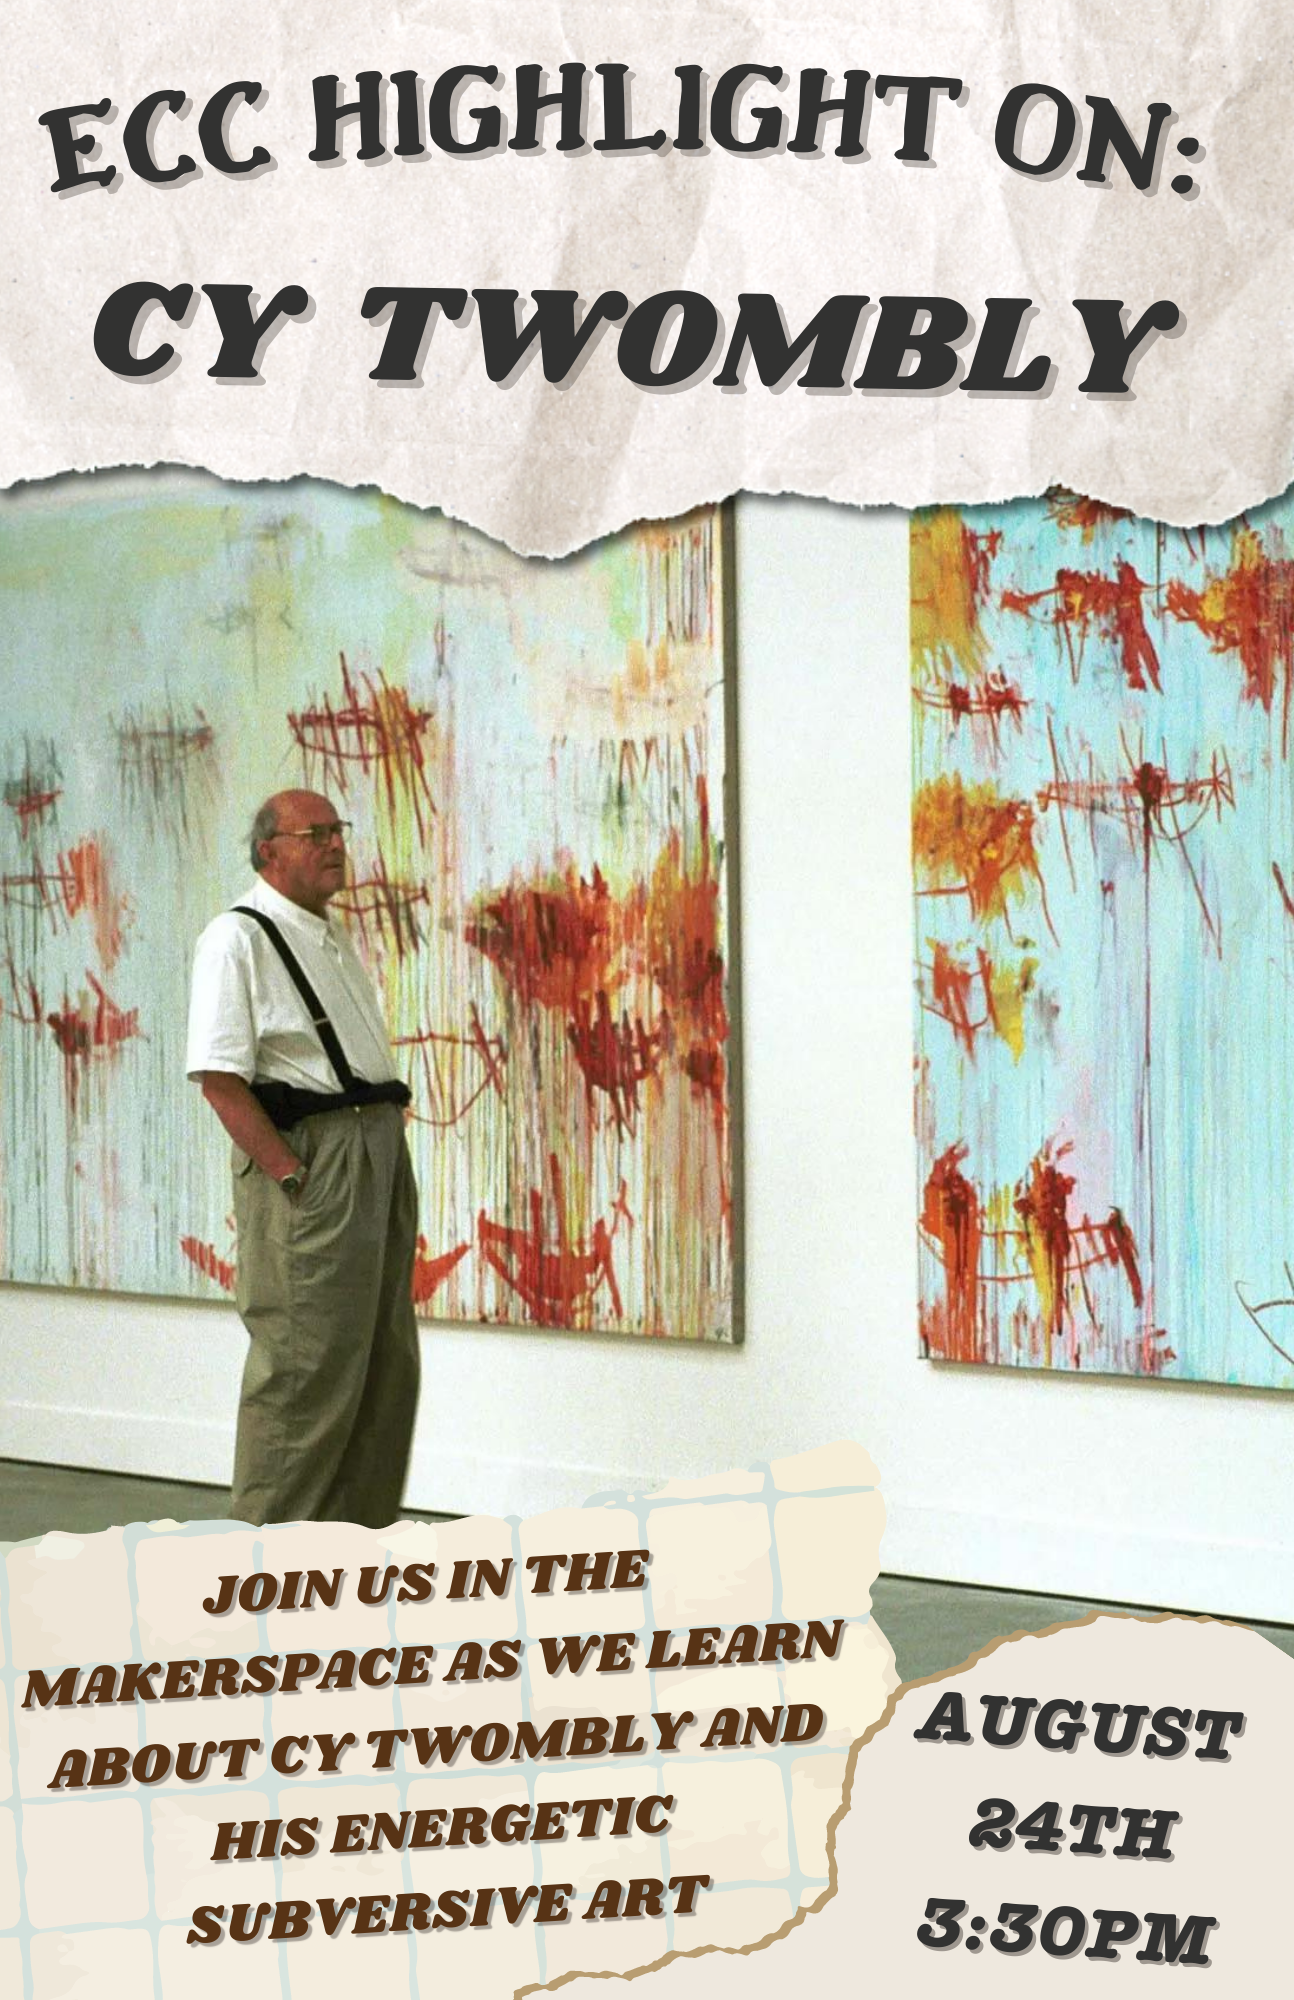 ECC Highlight On Cy Twombly